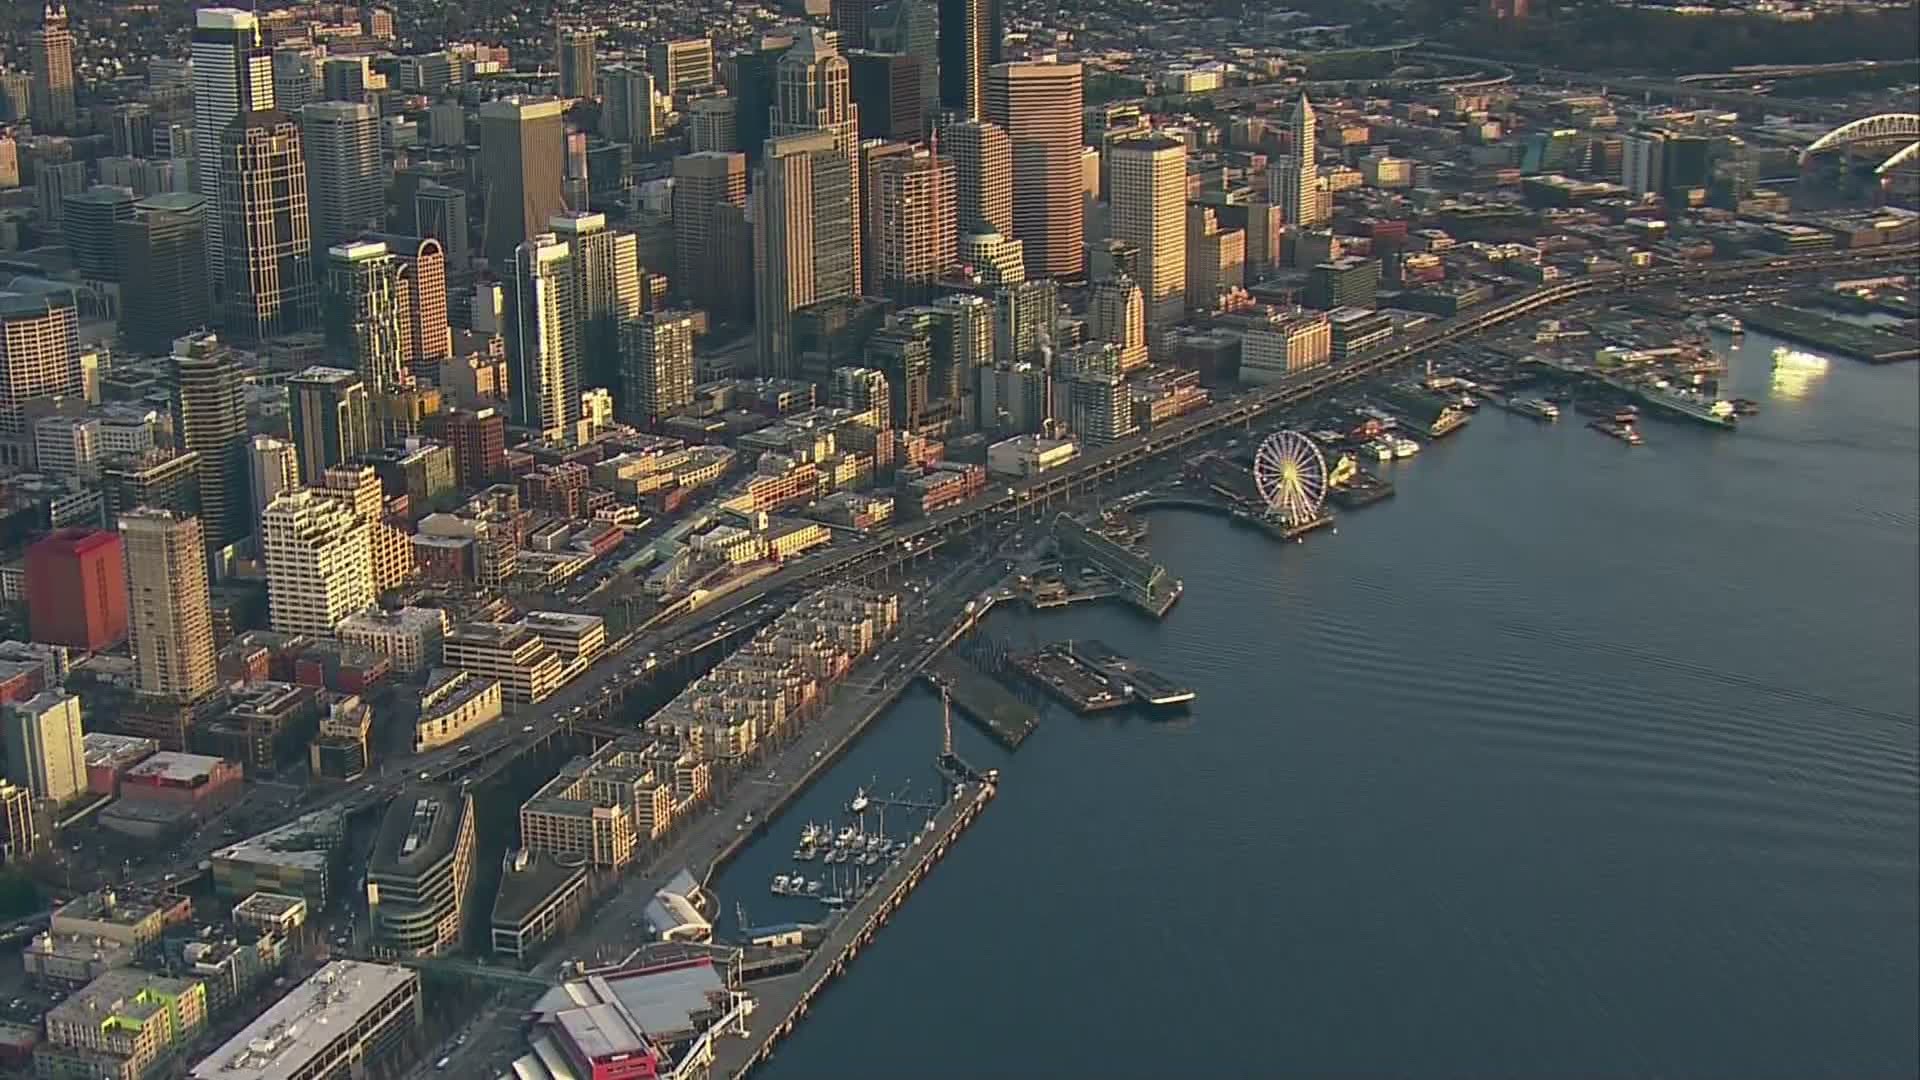 SkyKING flew over Seattle's Alaskan Way Viaduct on the final evening commute at sunset. Friday, January 11, 2019 king5.com/tunneleffect